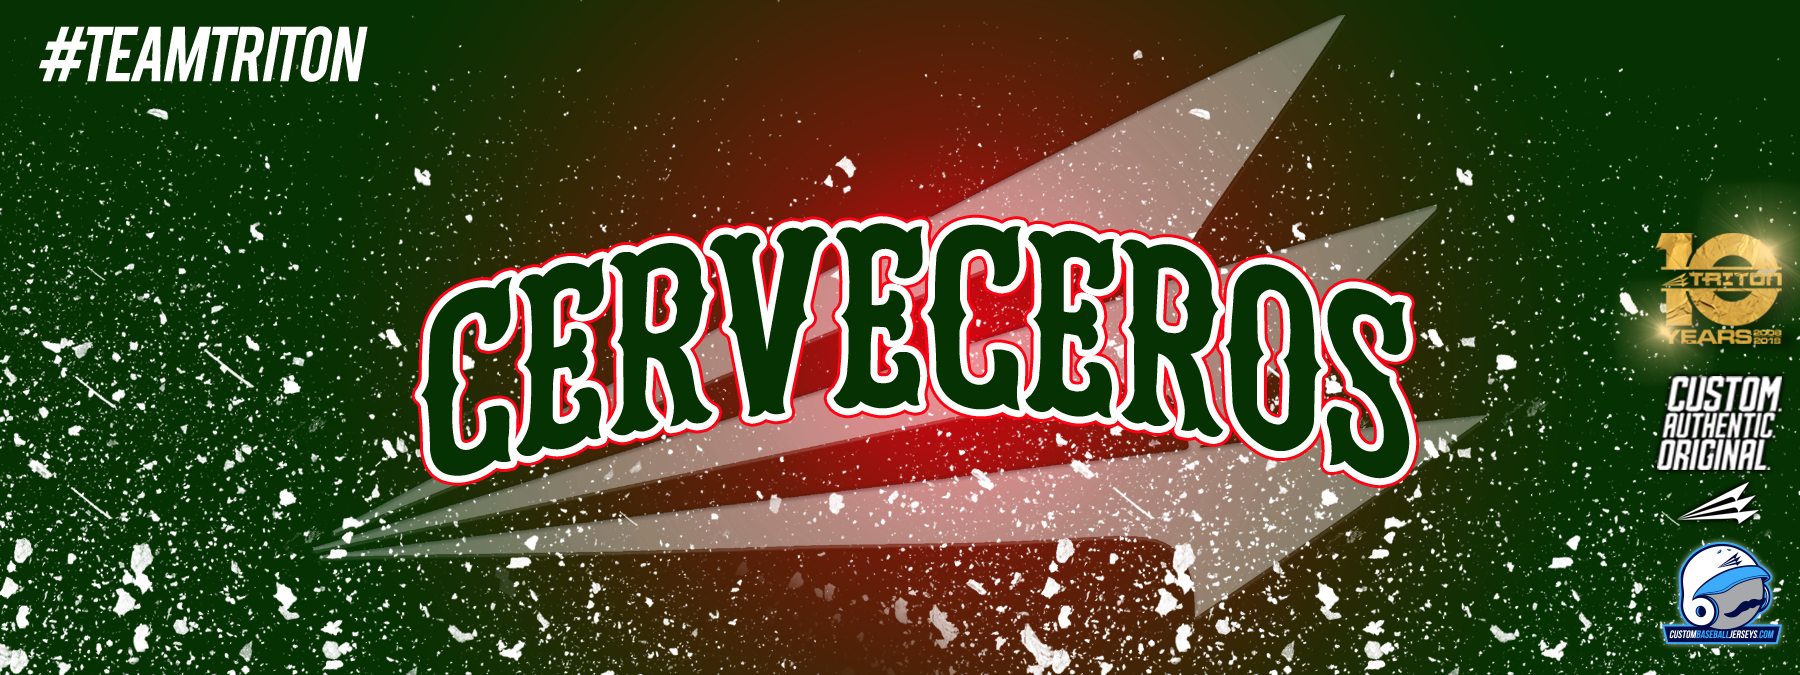 Cerveceros Jerseys Available for Sale This Weekend